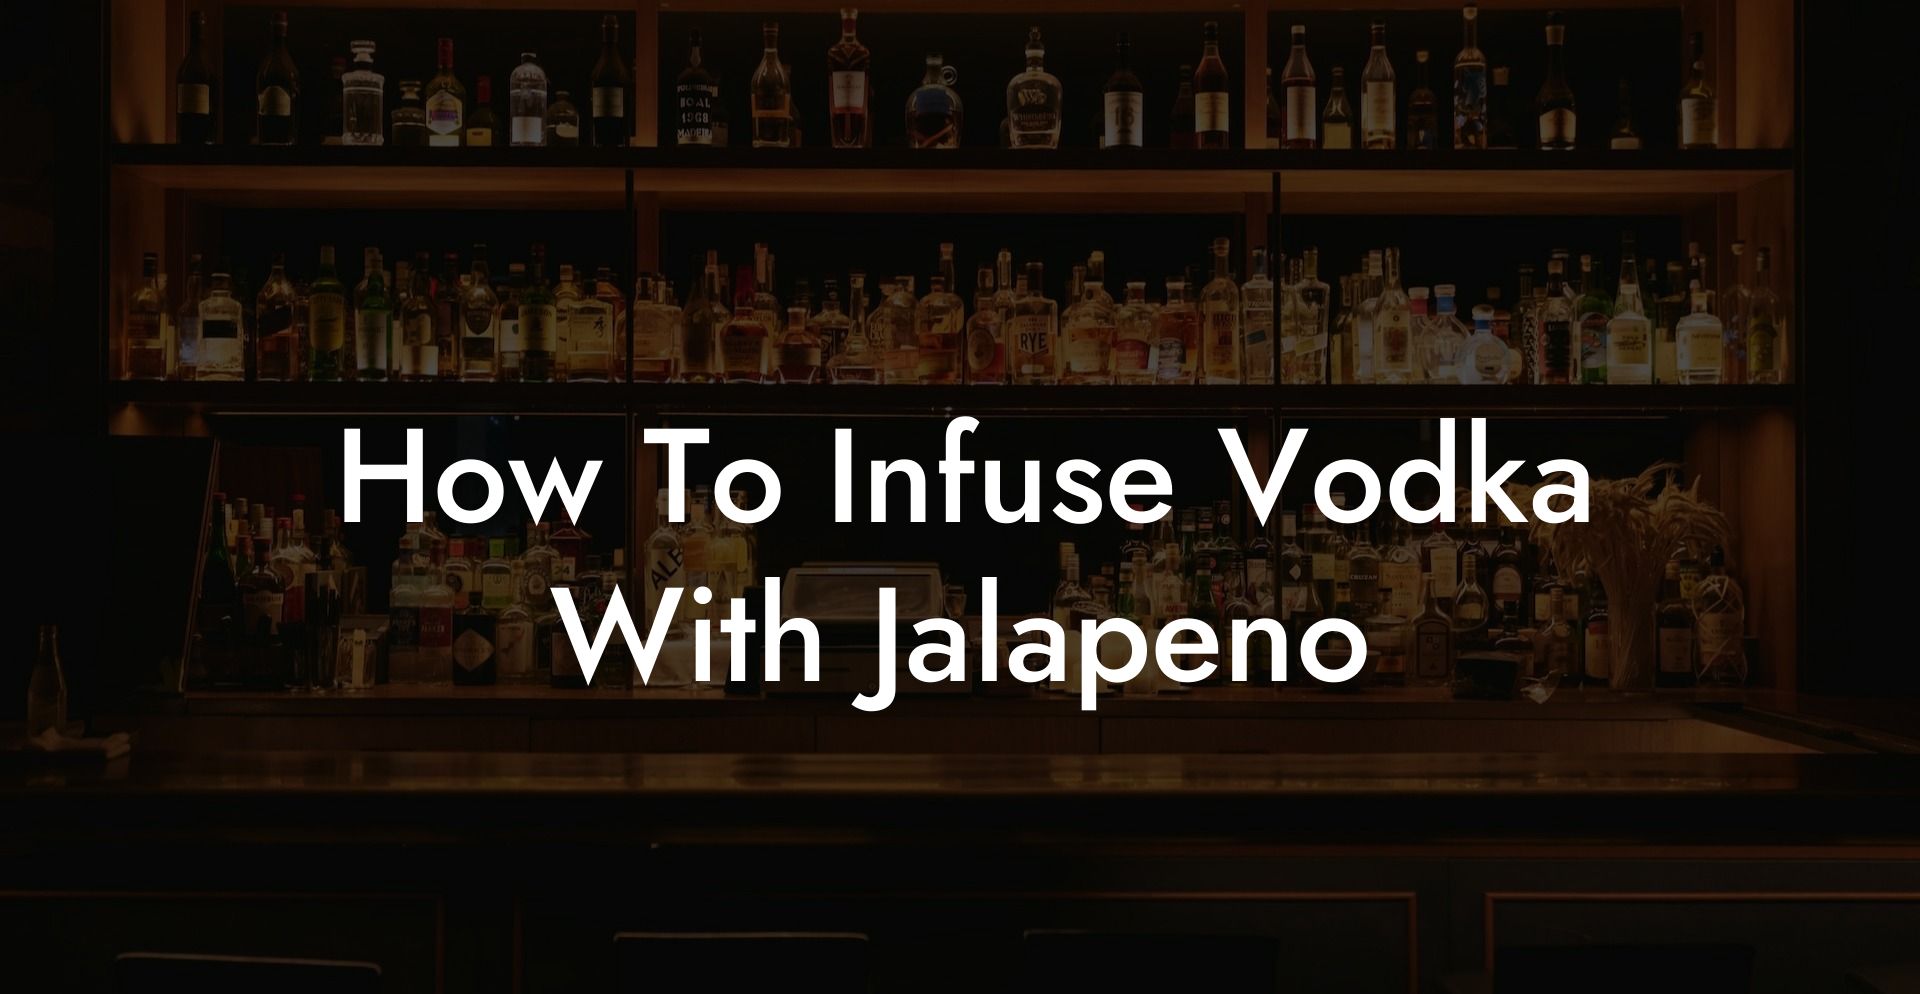 How To Infuse Vodka With Jalapeno